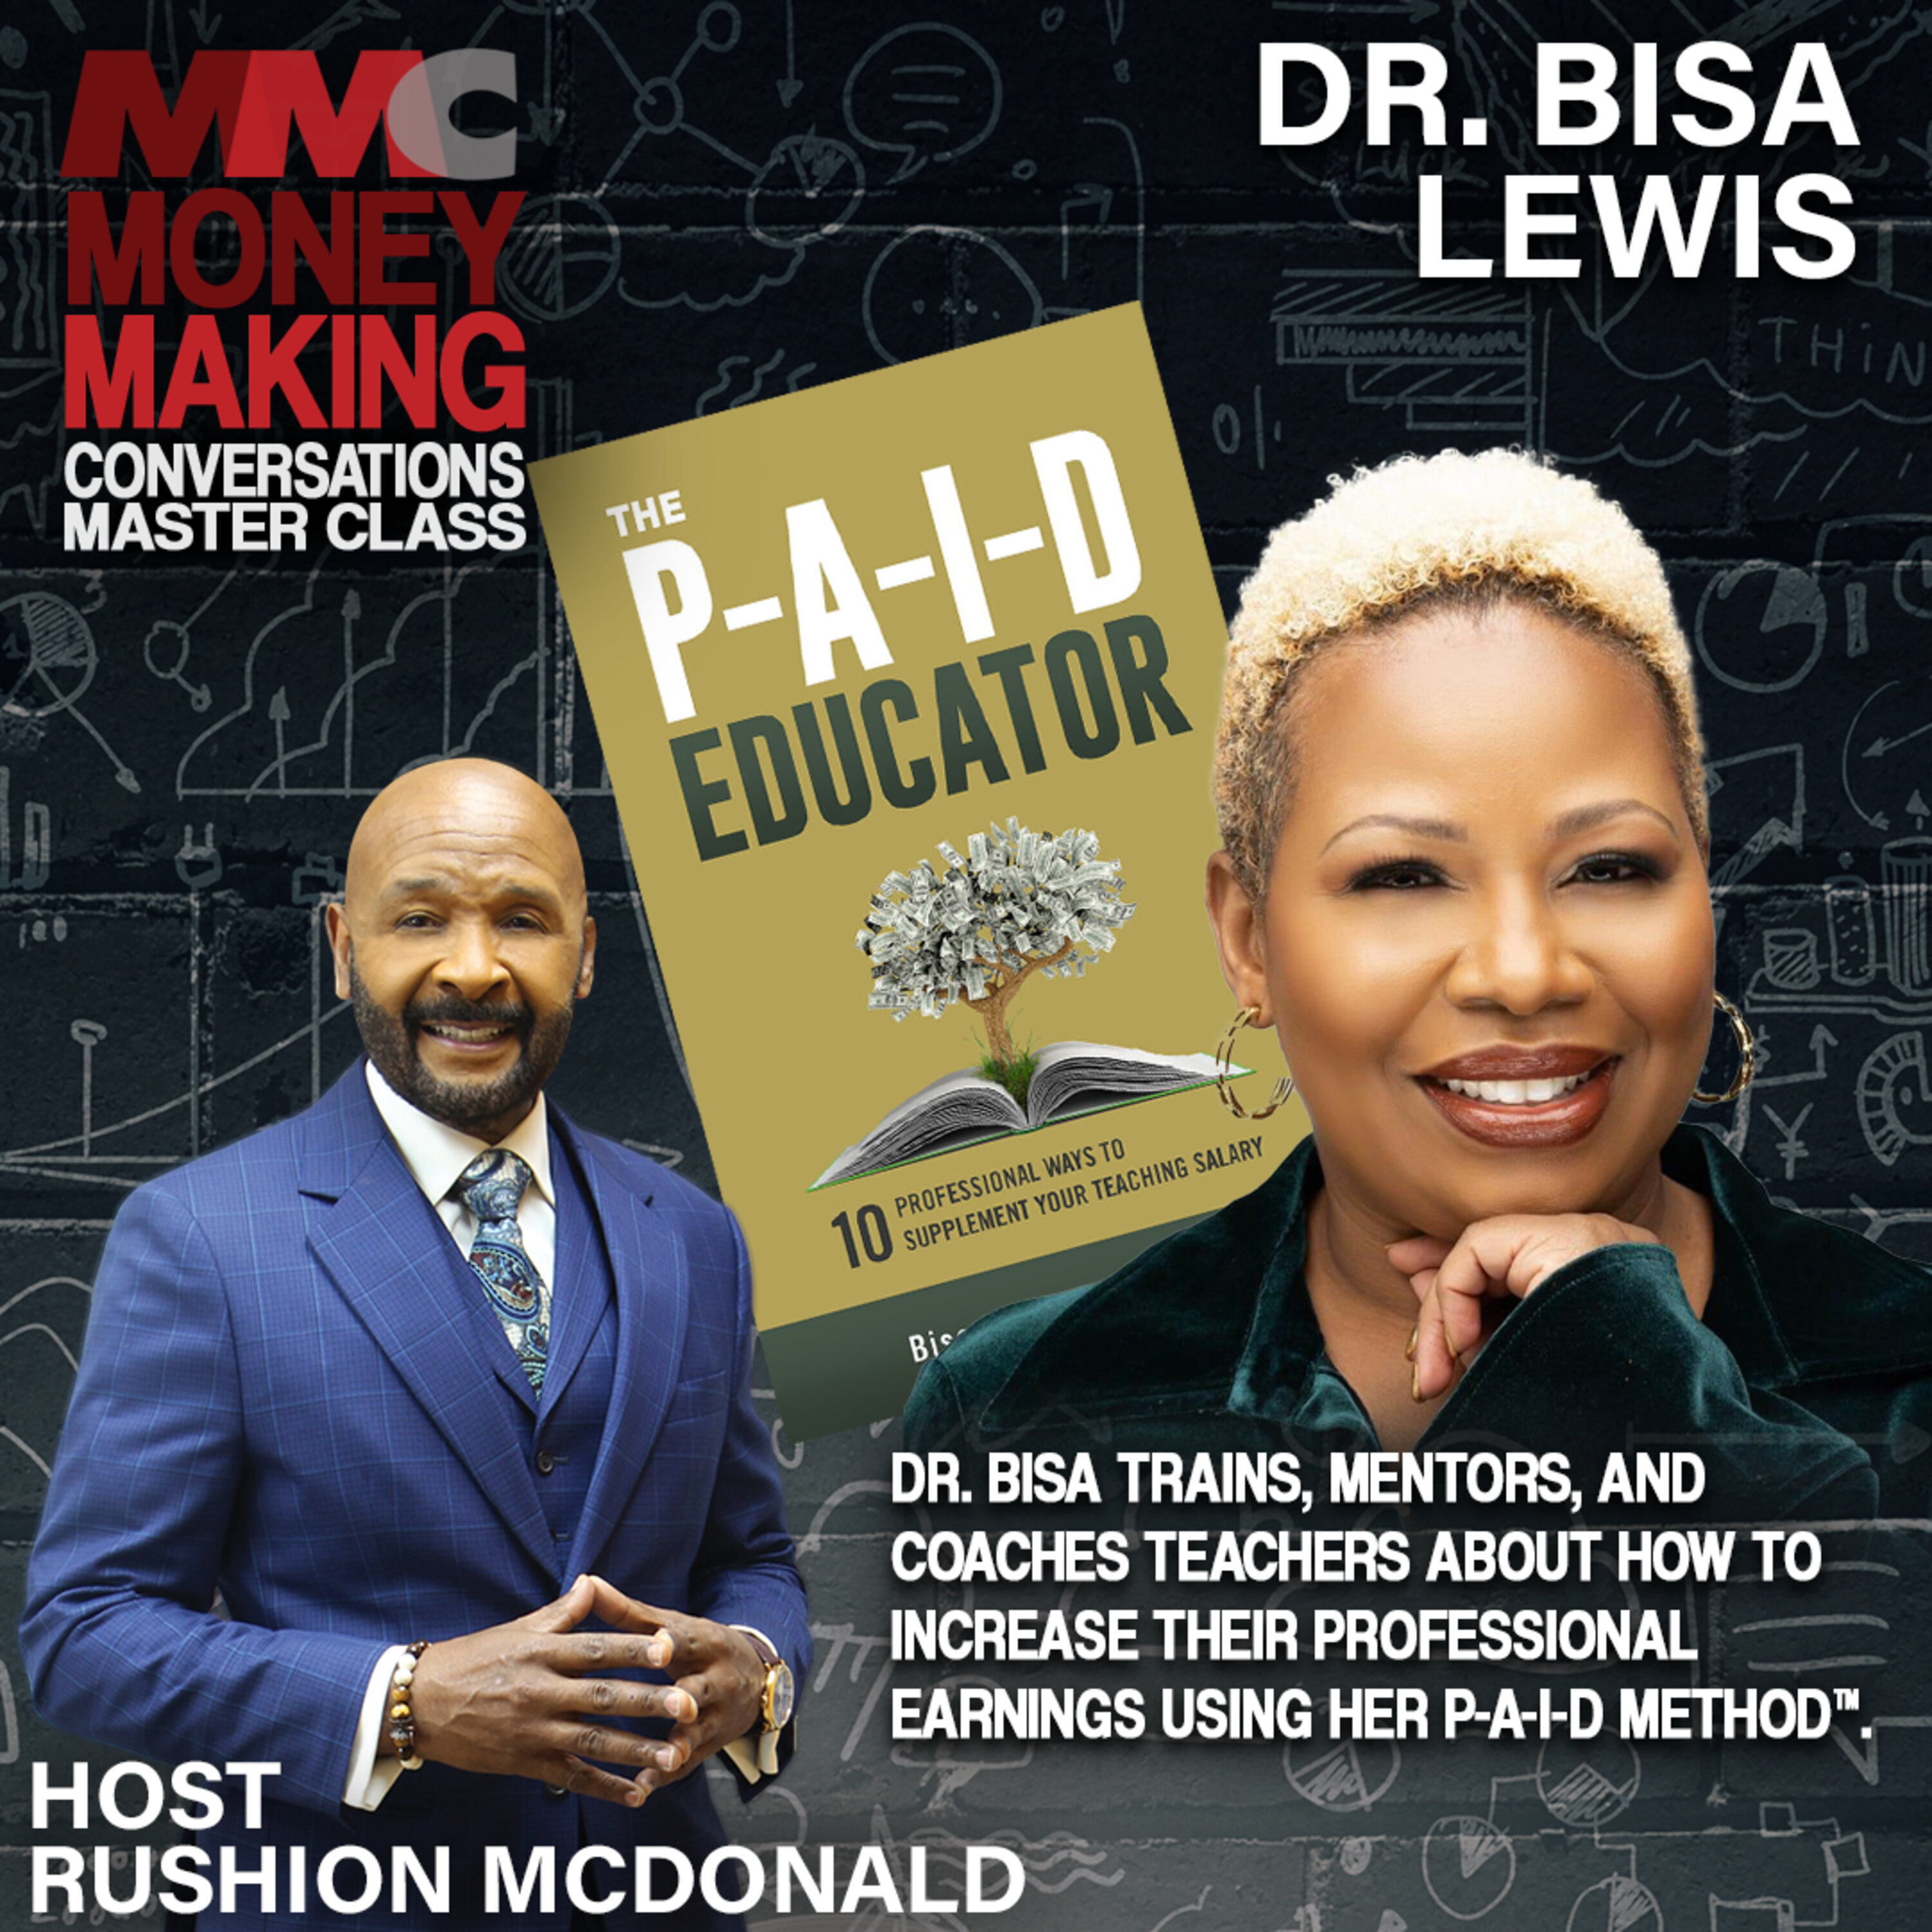 Dr. Bisa trains, mentors, and coaches teachers about how to increase their professional earnings using her P-A-I-D Method™.